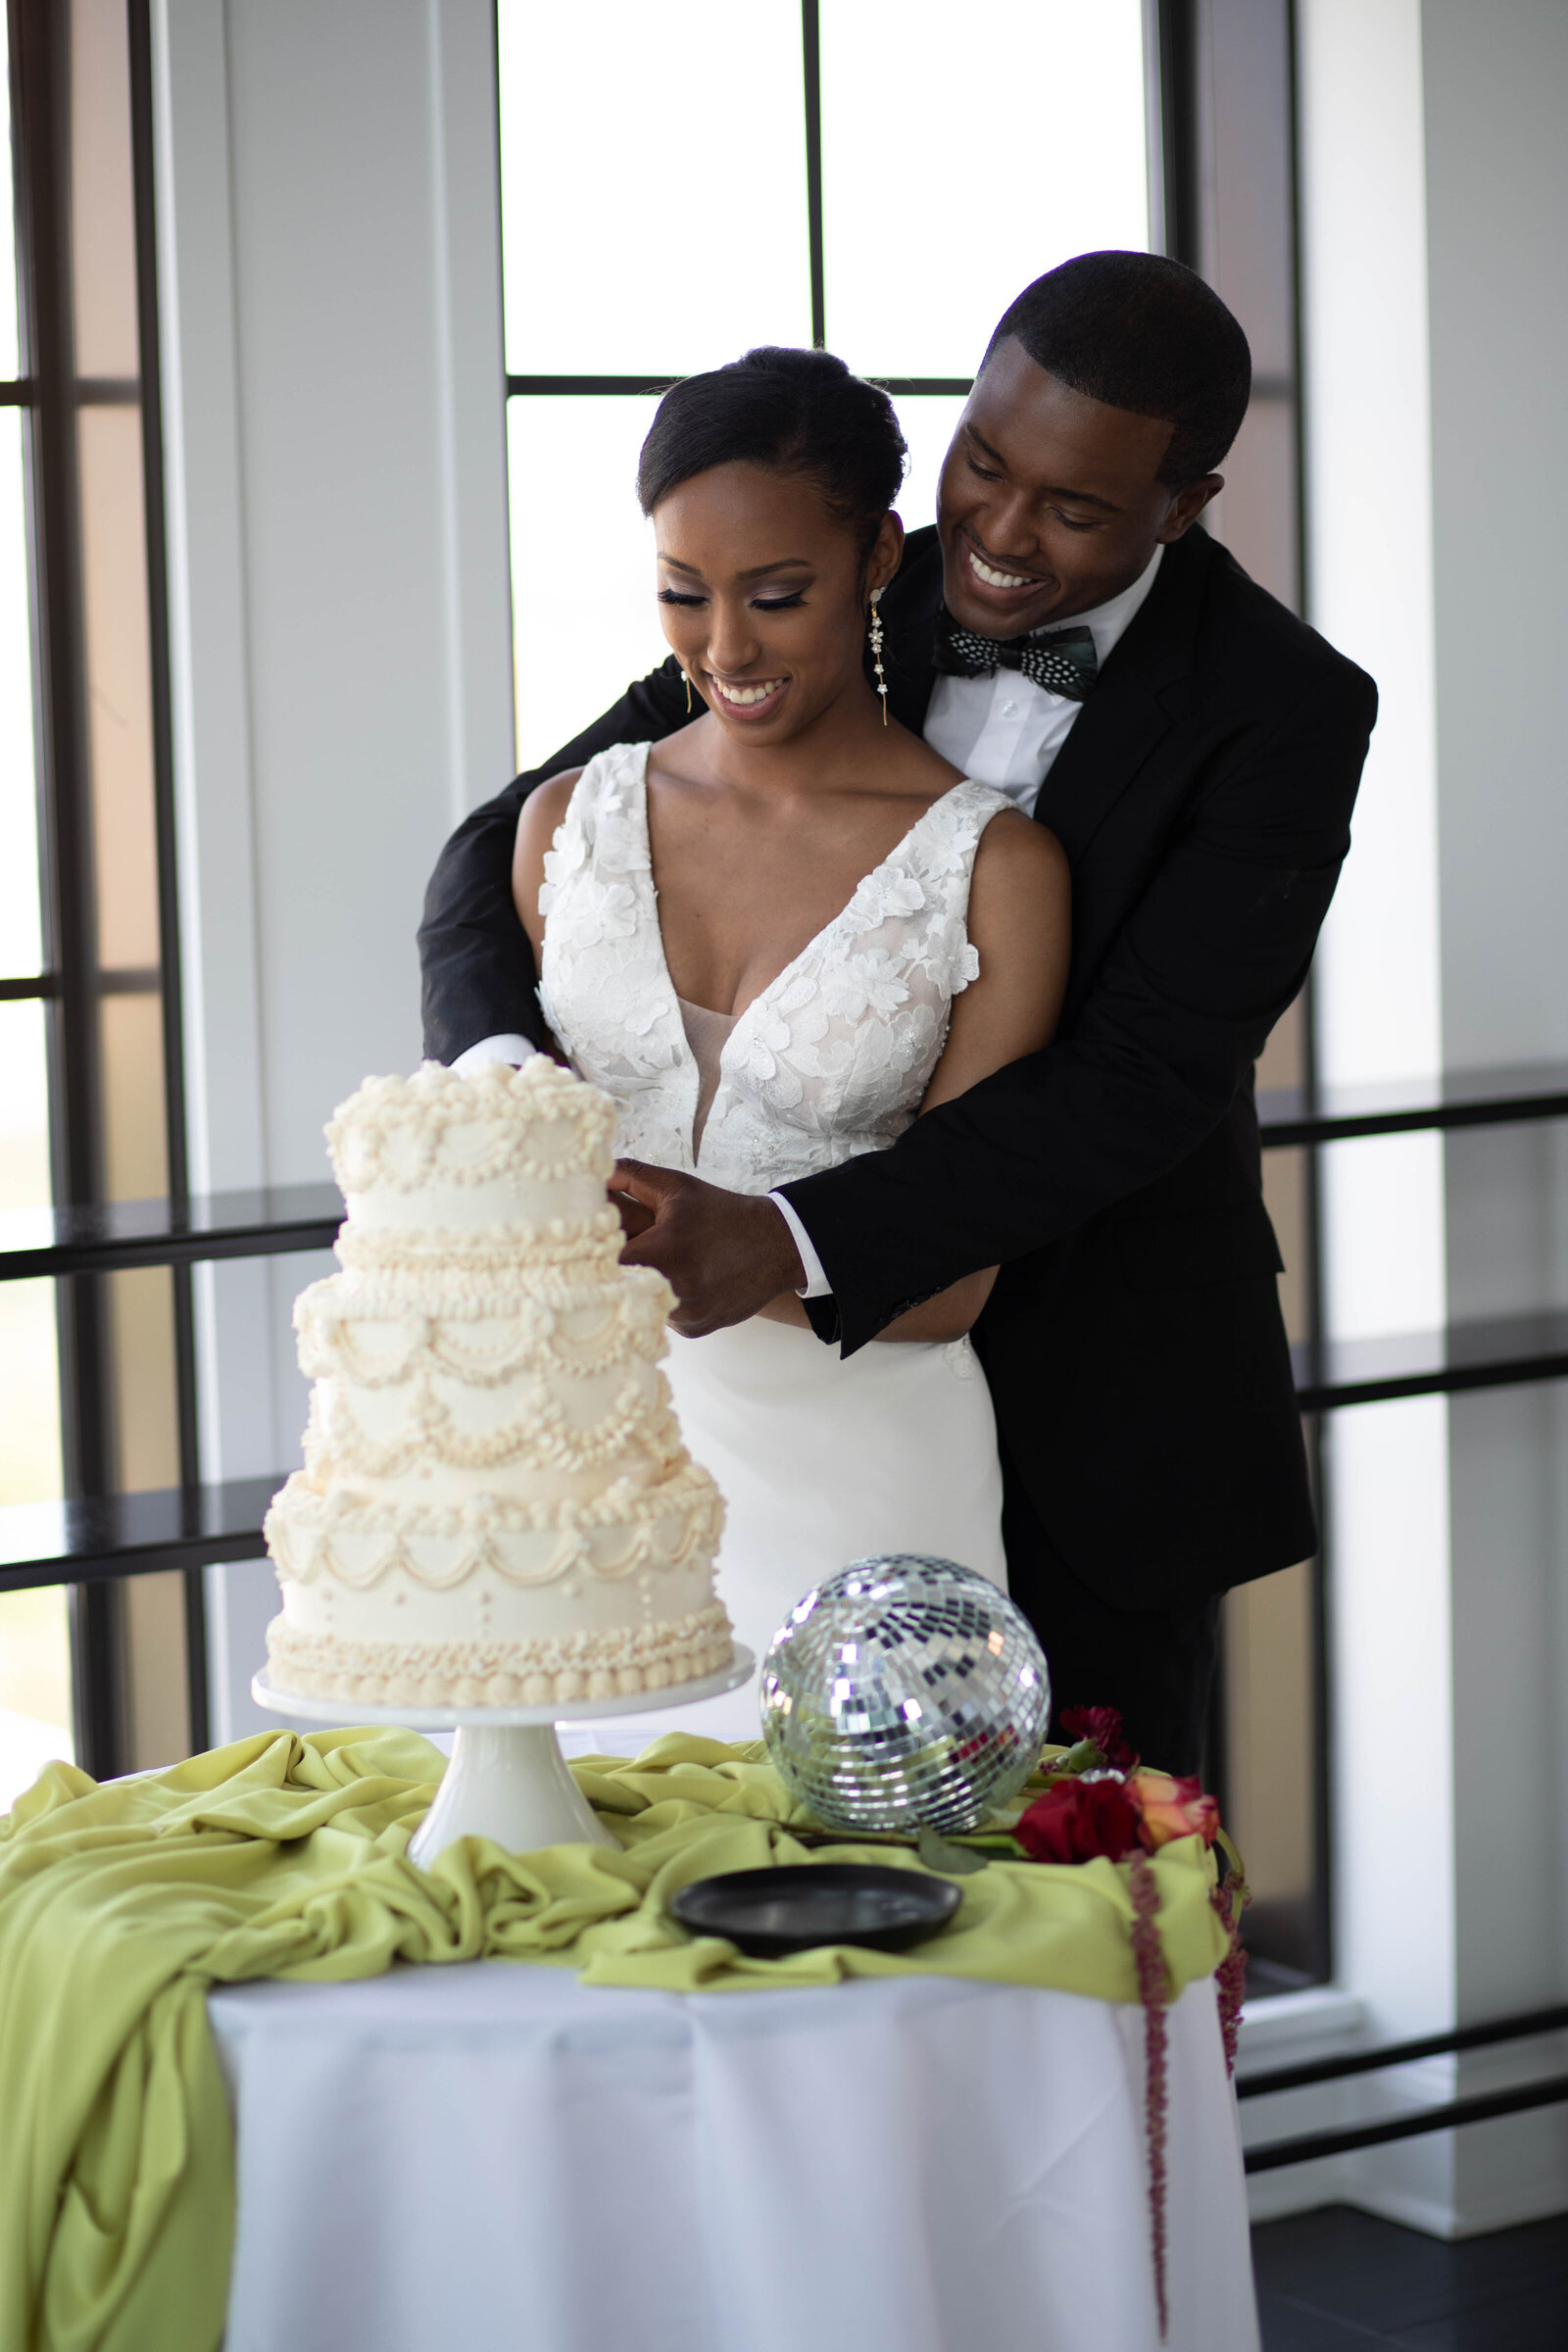 Bride-and-groom-cutting-cake